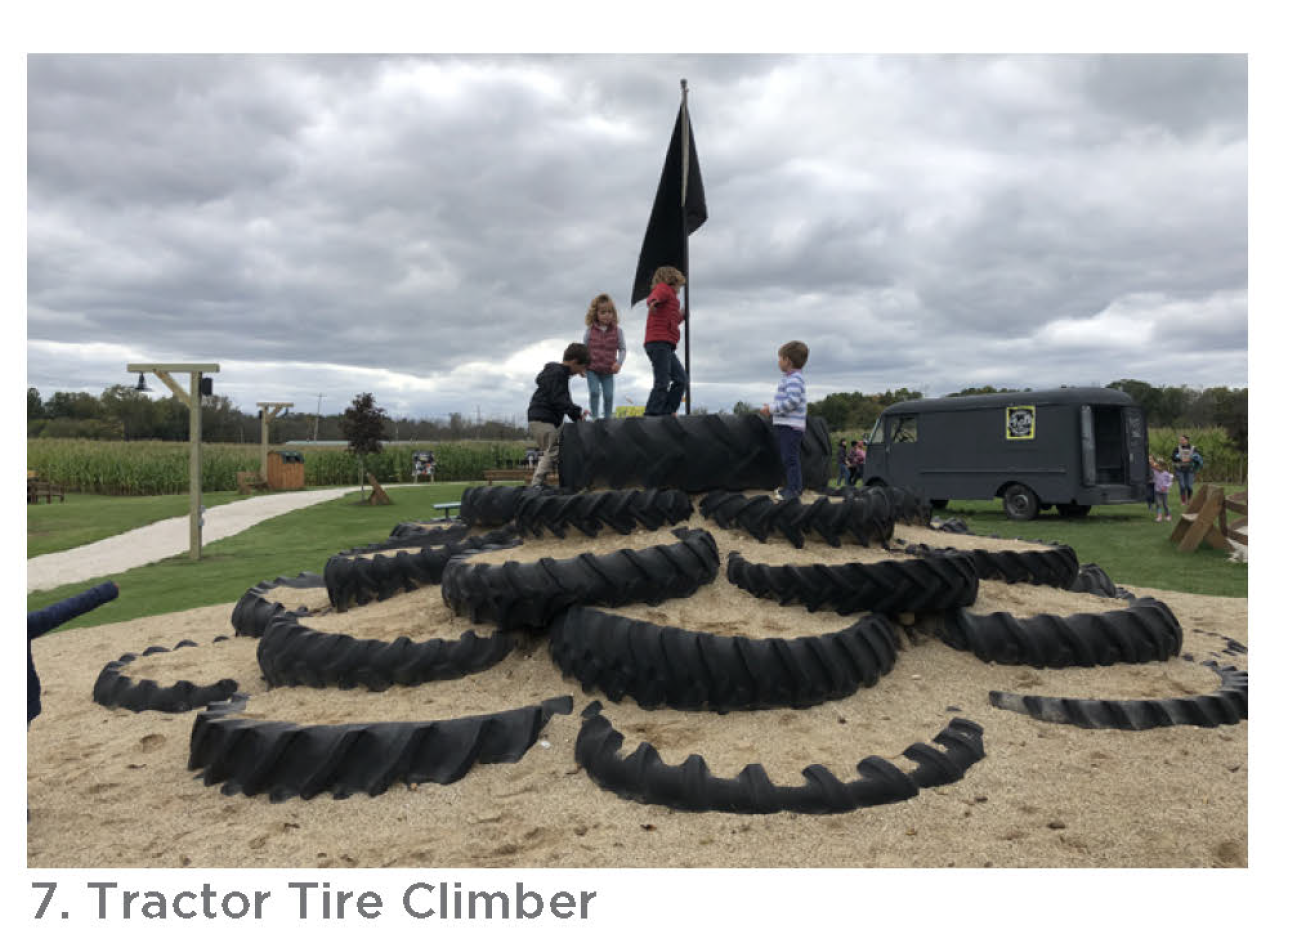 Photo of the tractor tire climber.